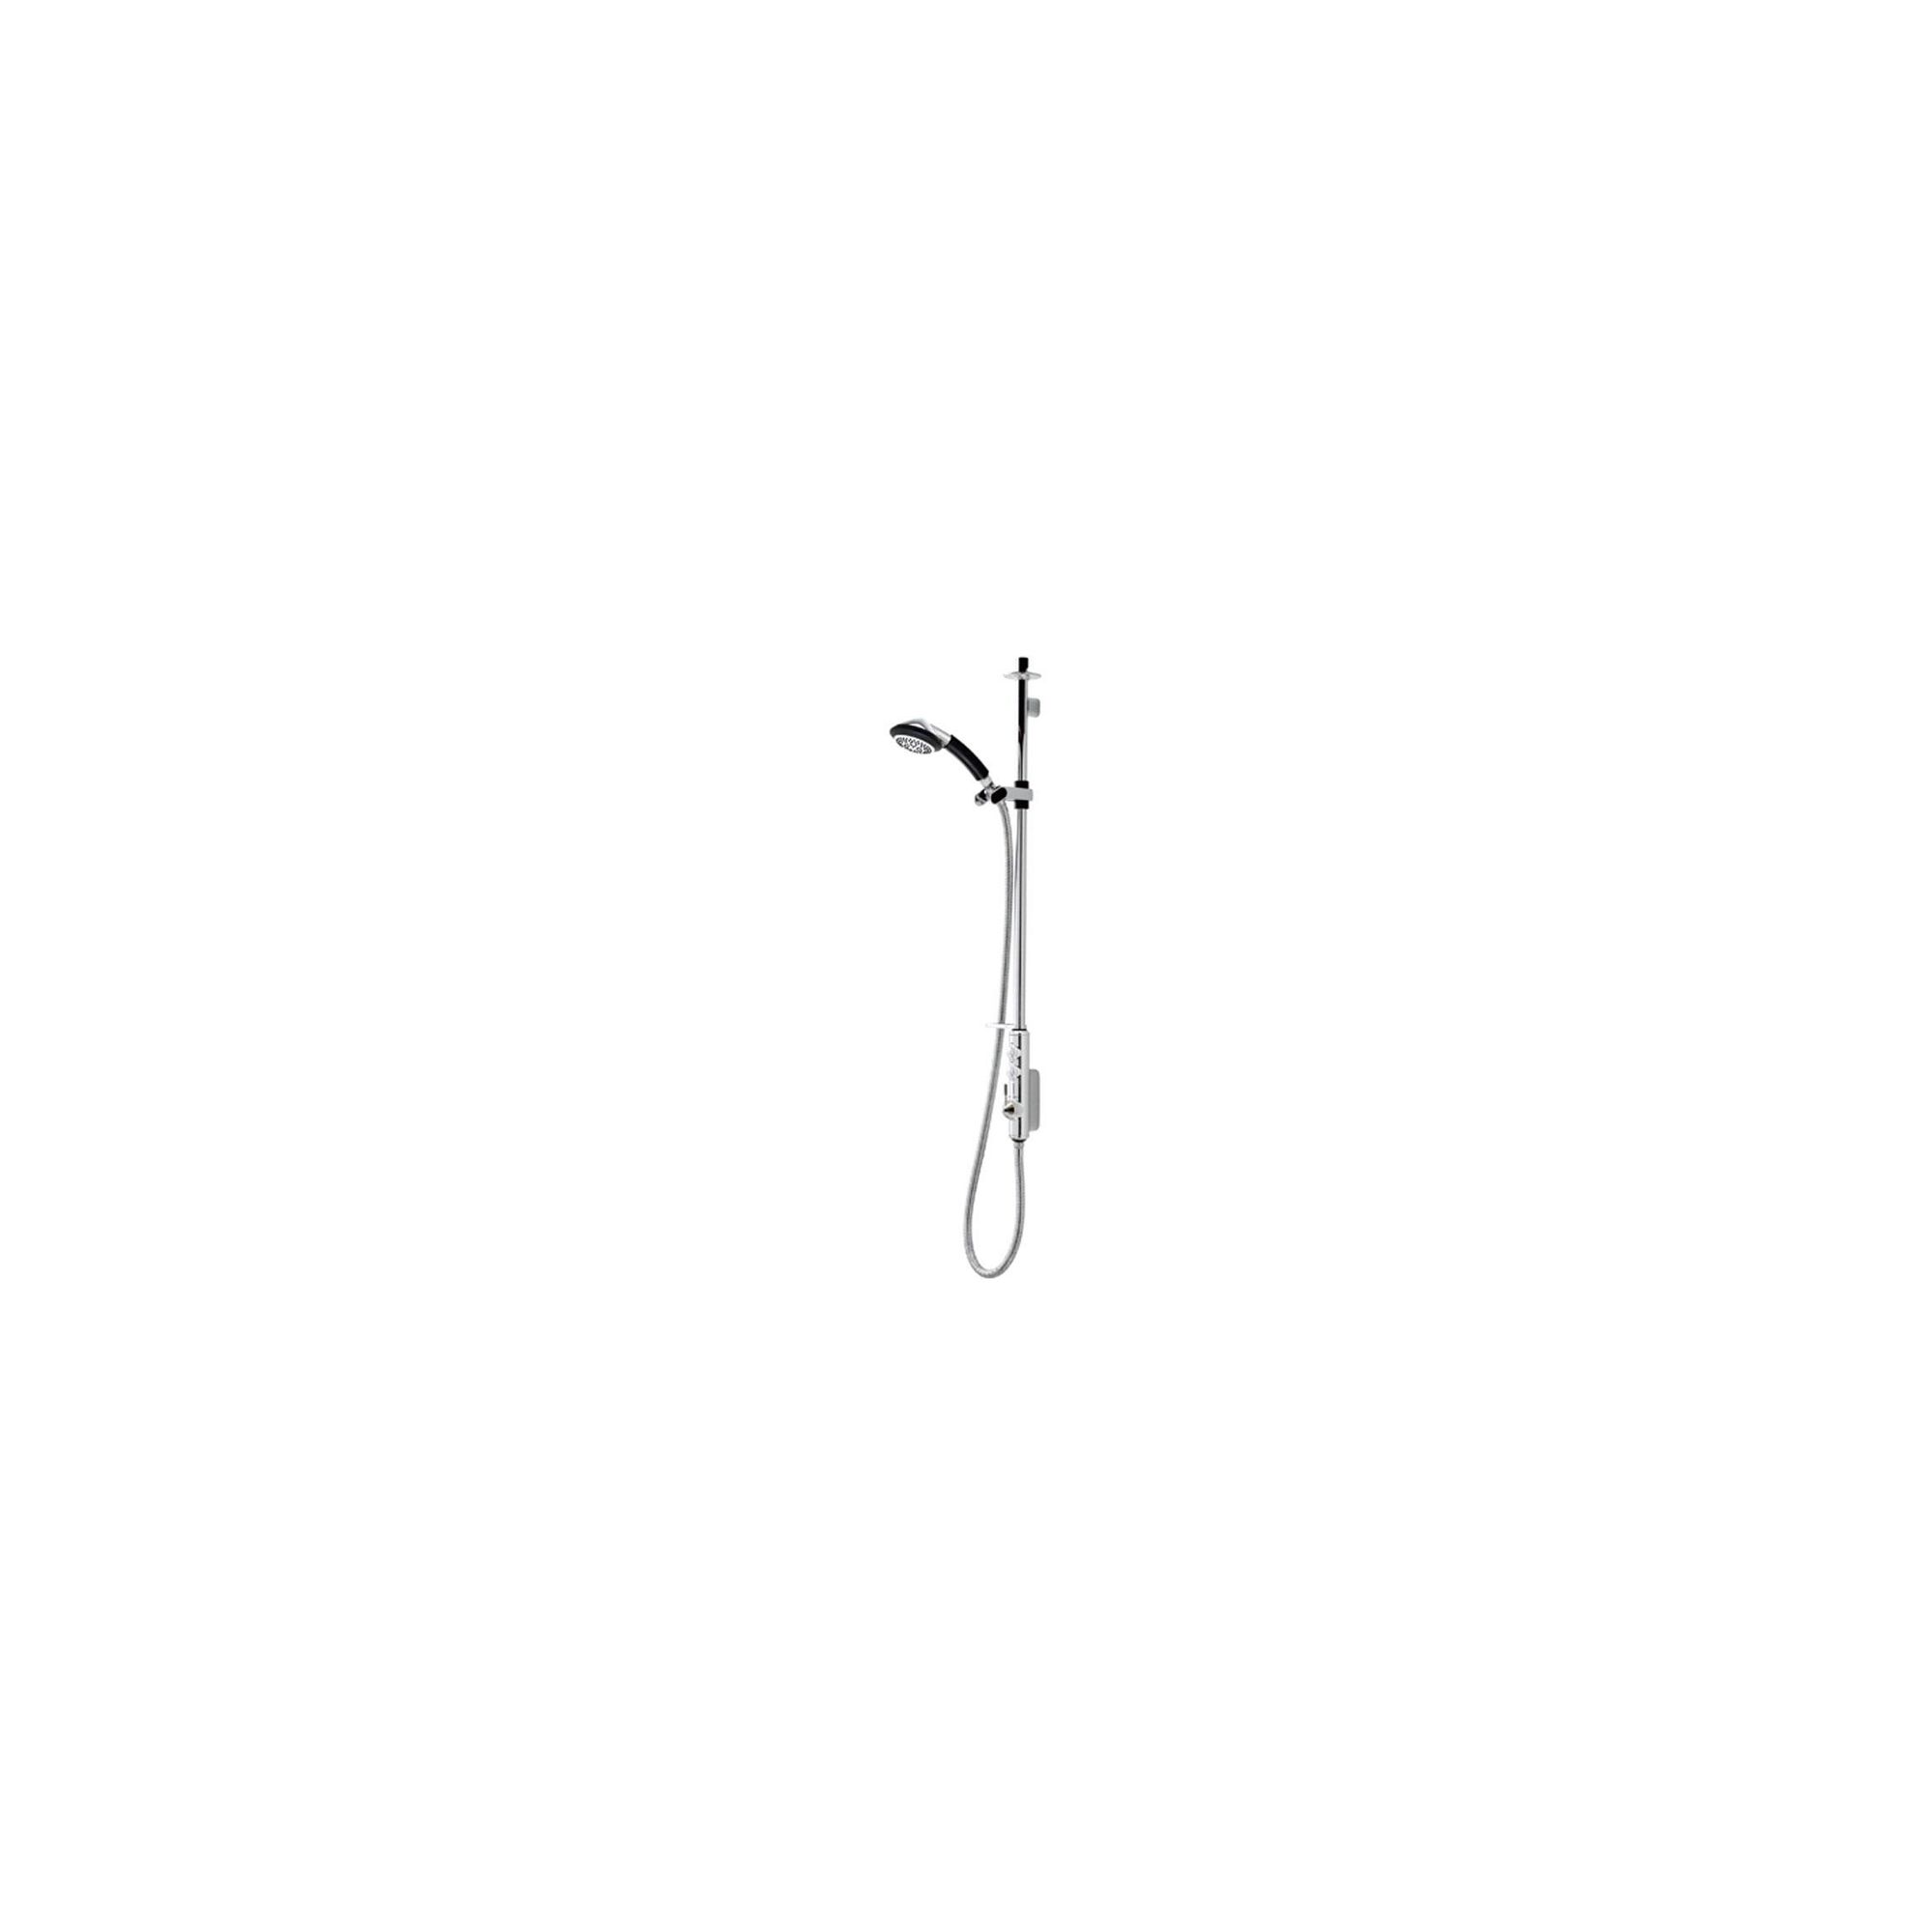 Aqualisa Axis Digital Exposed Shower with Adjustable Head Kit at Tesco Direct